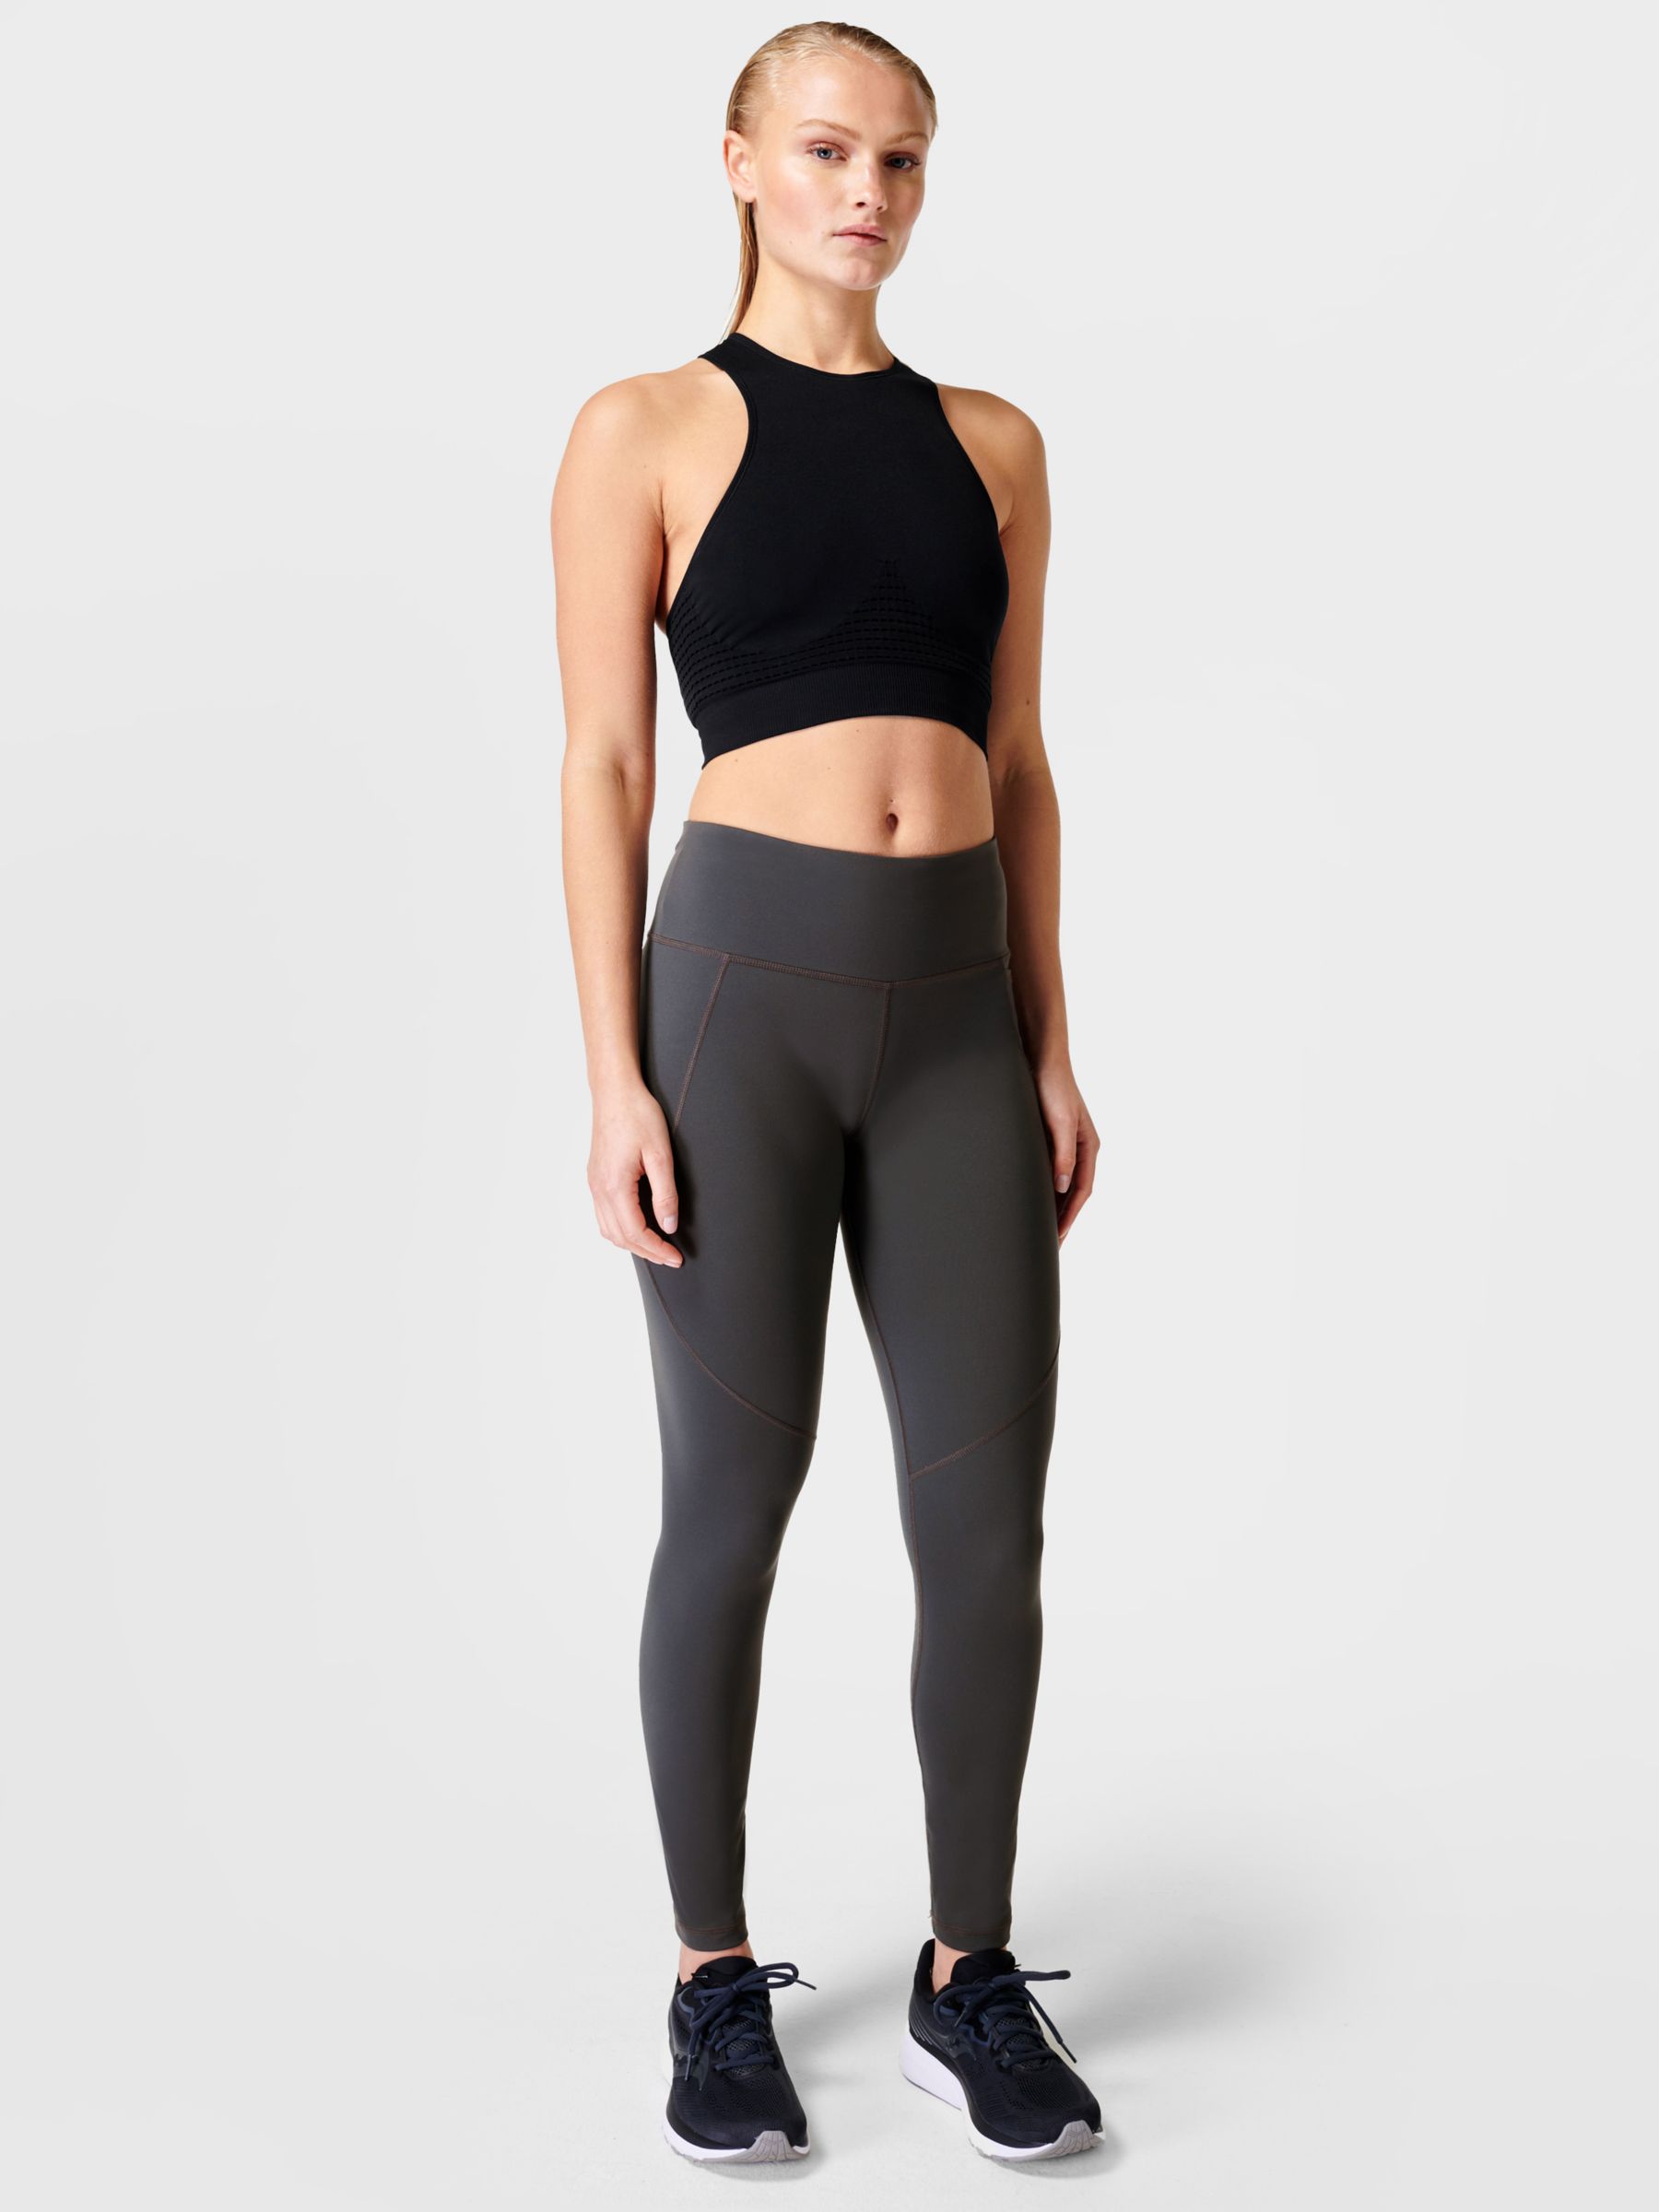 Sweaty Betty Power 7/8 Leggings Reviewed  International Society of  Precision Agriculture